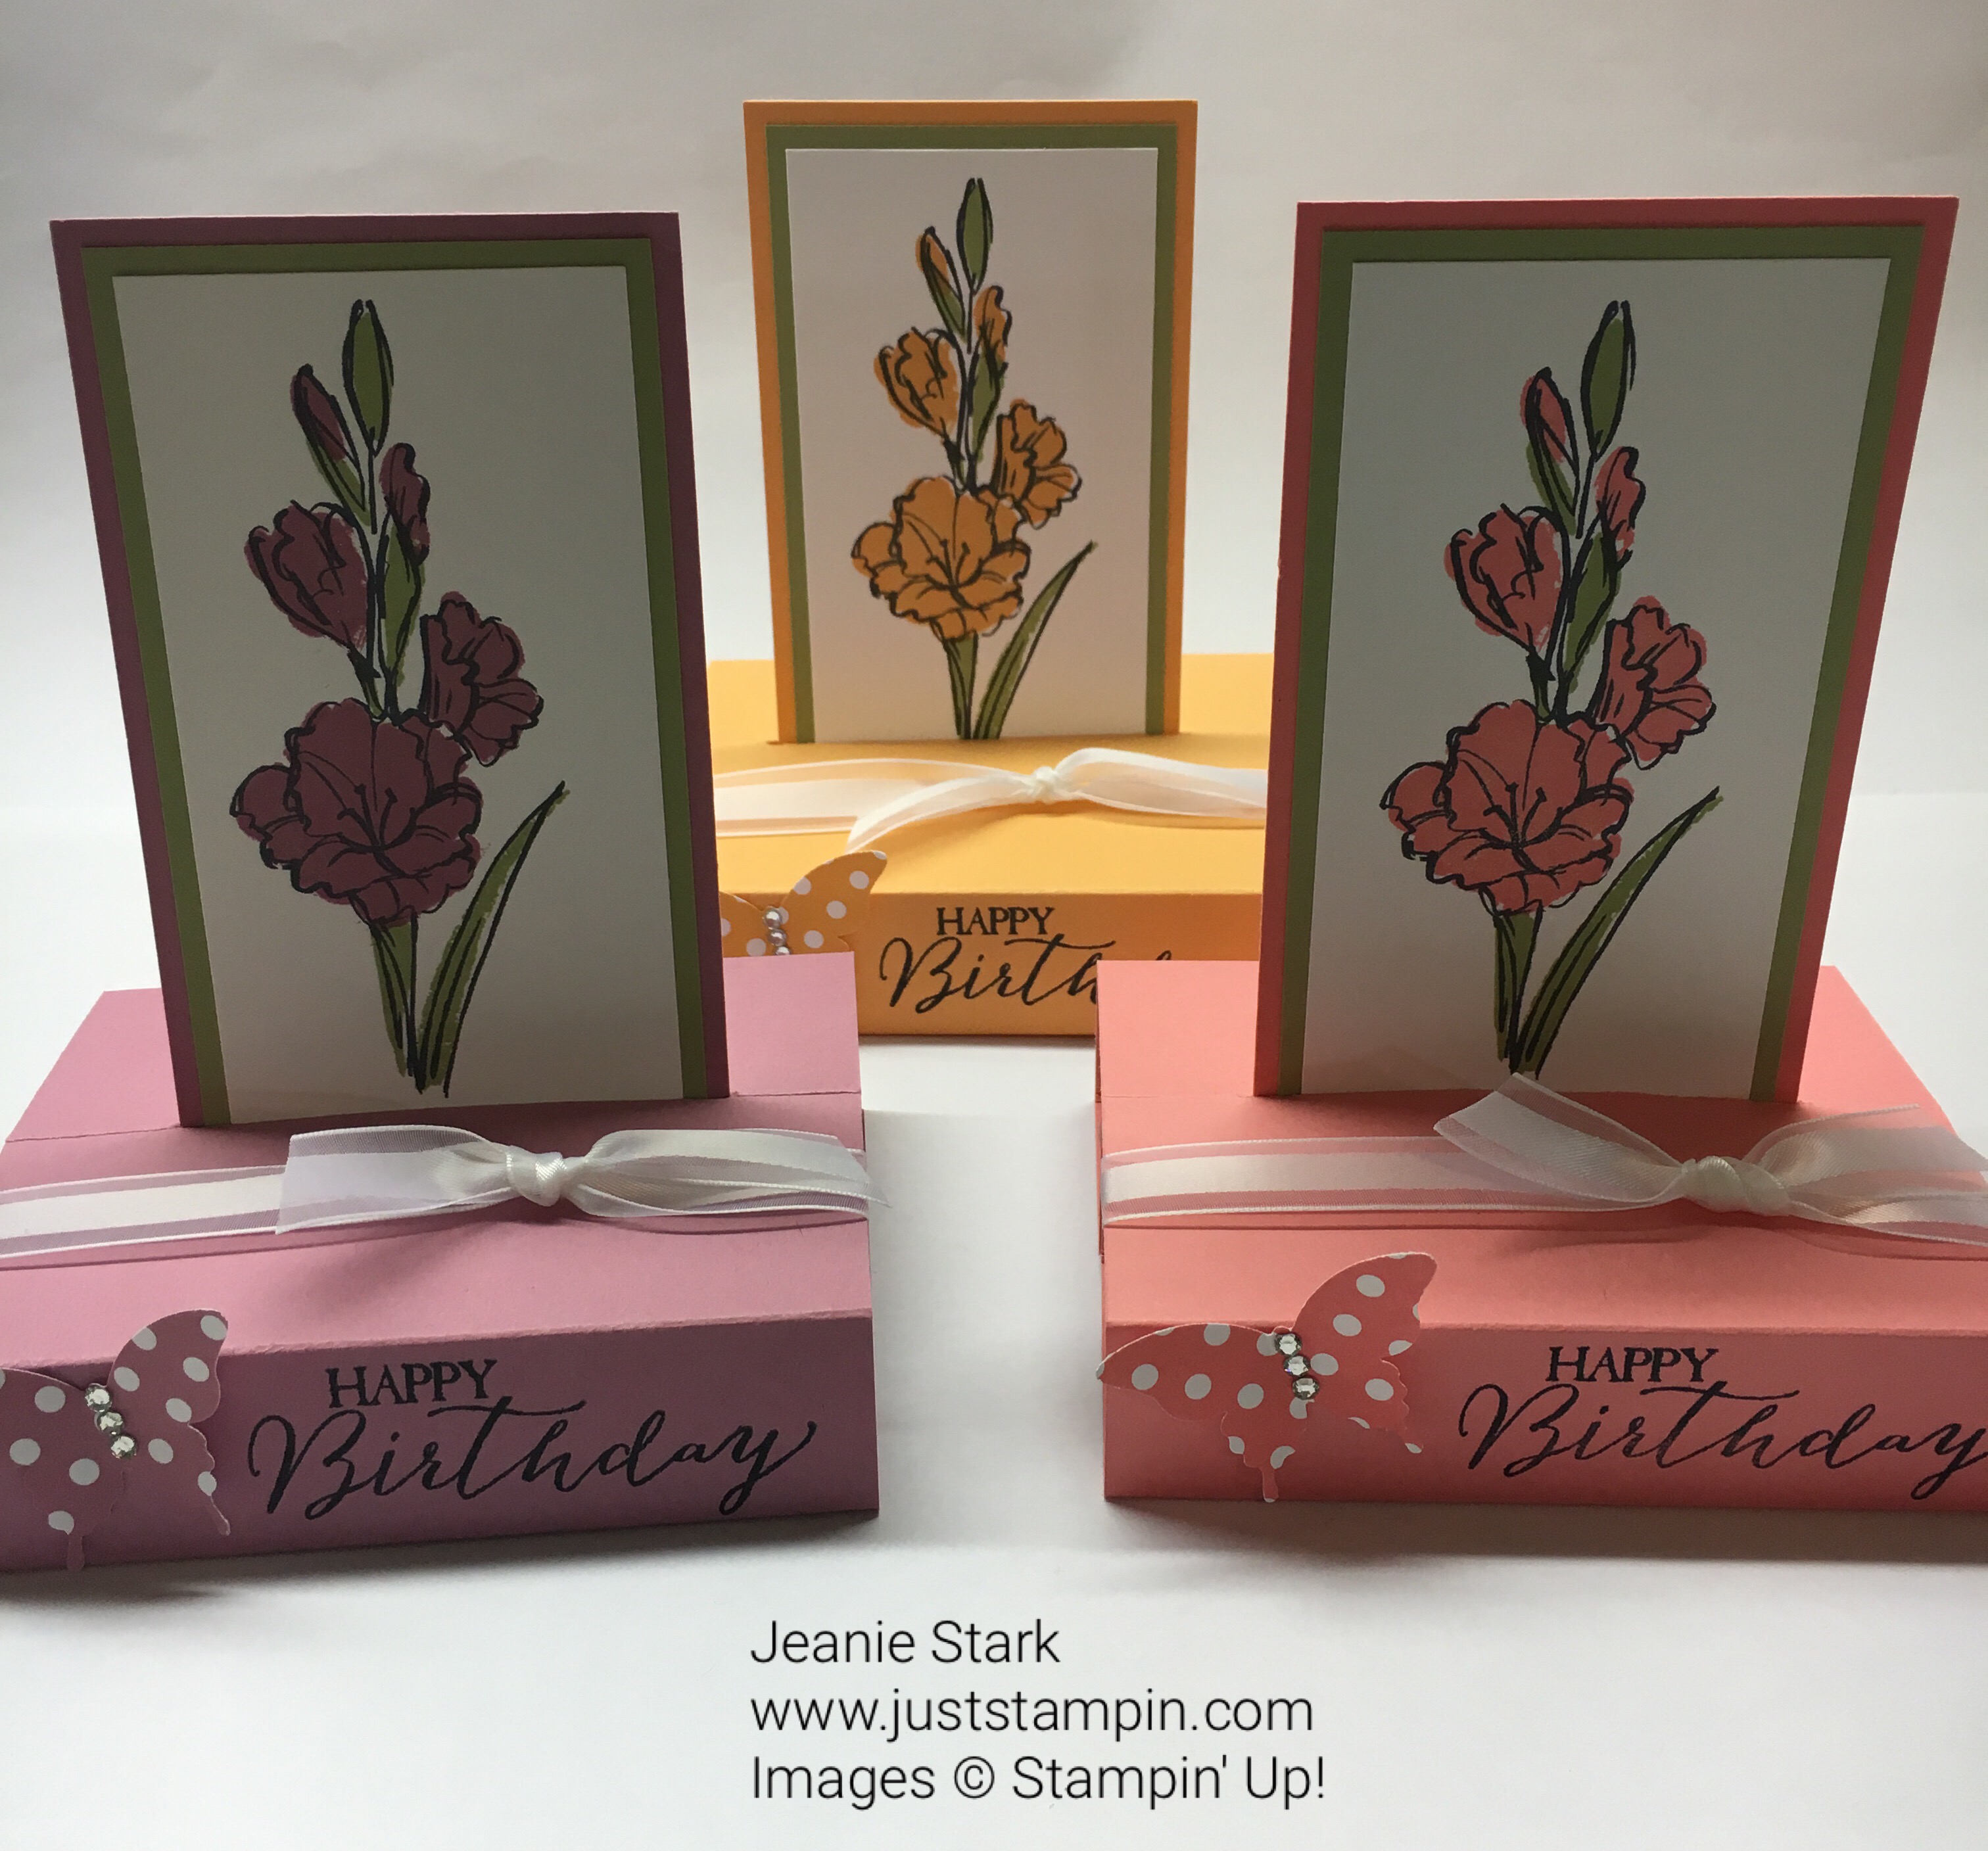 Stampin Up Gift Of Love Pop Up Fun Fold Happy Birthday Card idea. For directions and supplies visit www.juststampin.com